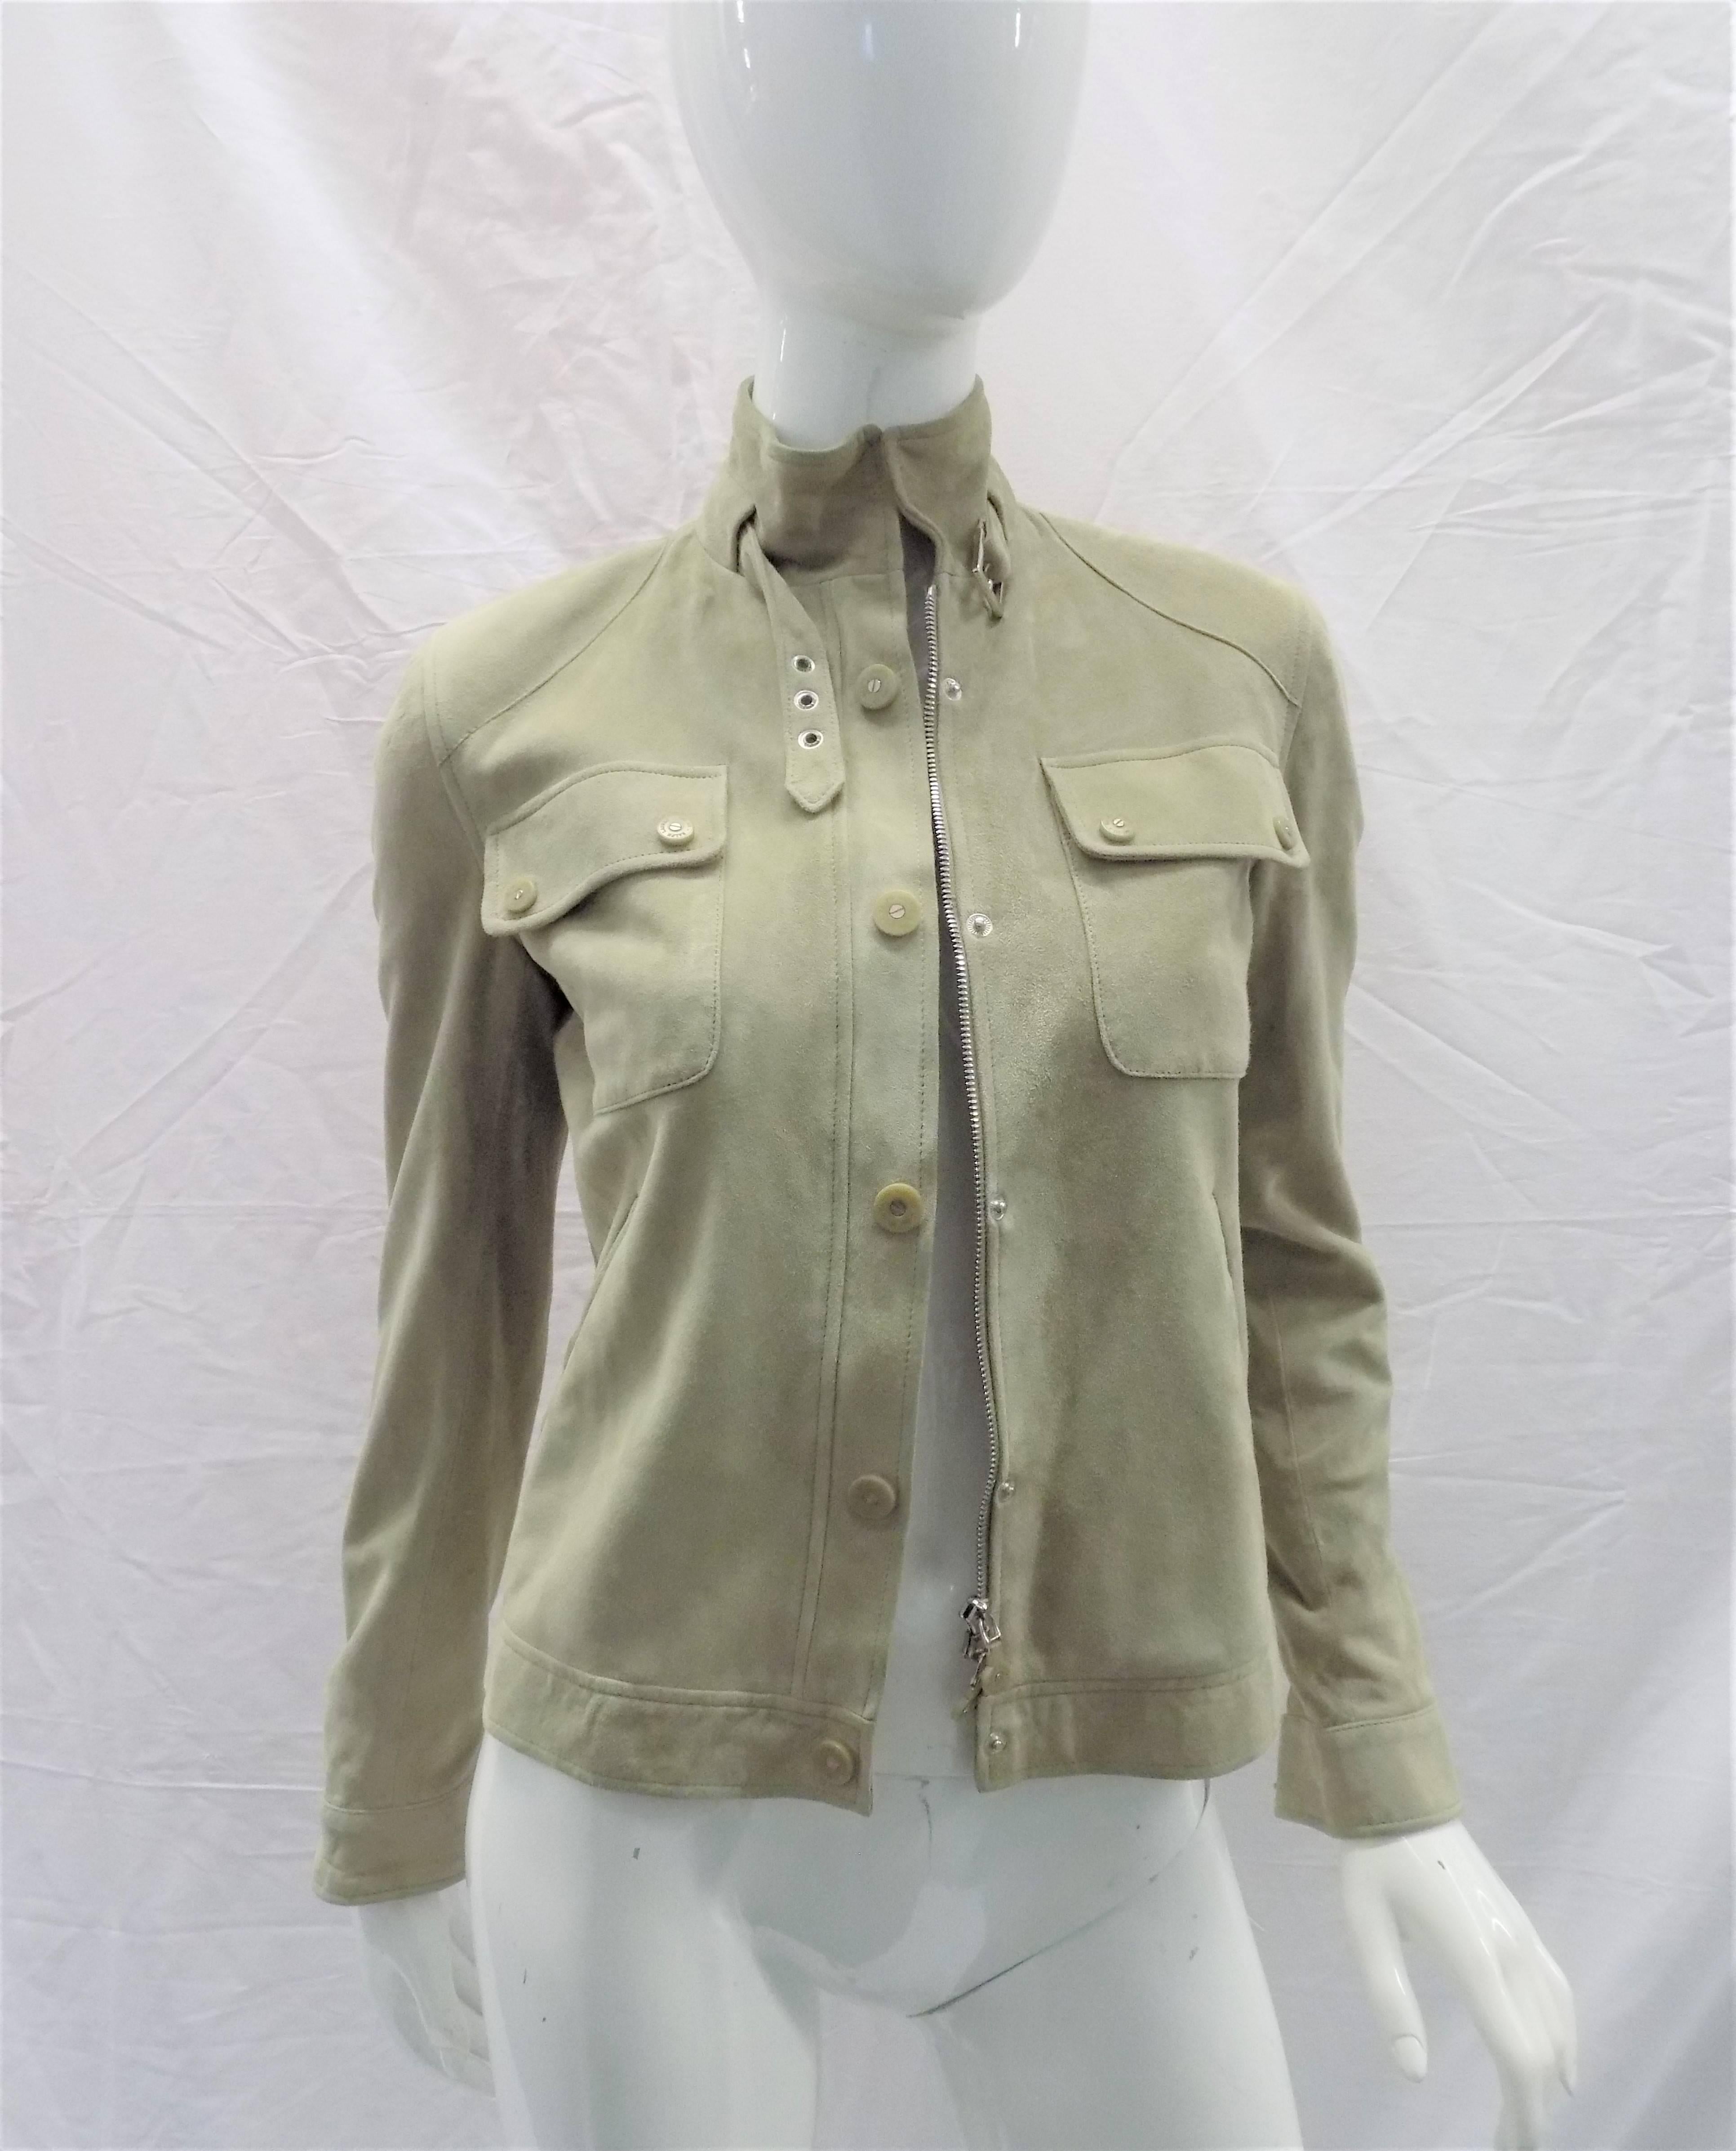 Fabulous and in like new condition Ralph Lauren Black Label woman  Suede Leather Biker Jacket Coat Small, Zip front with snaps. buckle at the neckline. Two top front pockets. Fully lines. Black label. Retail price around $2000. Size 2 Taupe